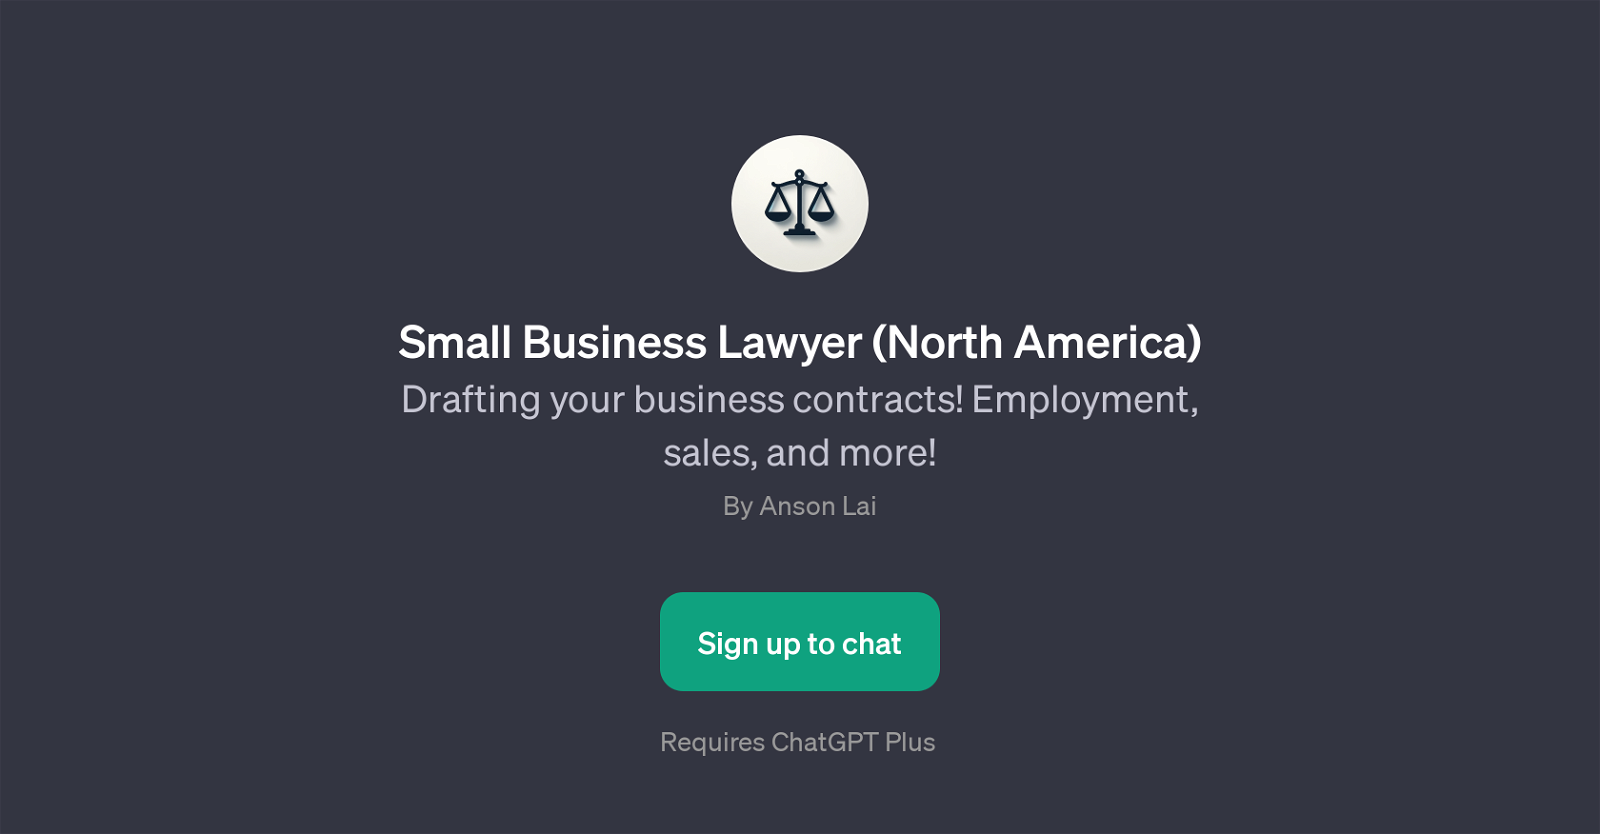 Small Business Lawyer (North America) website